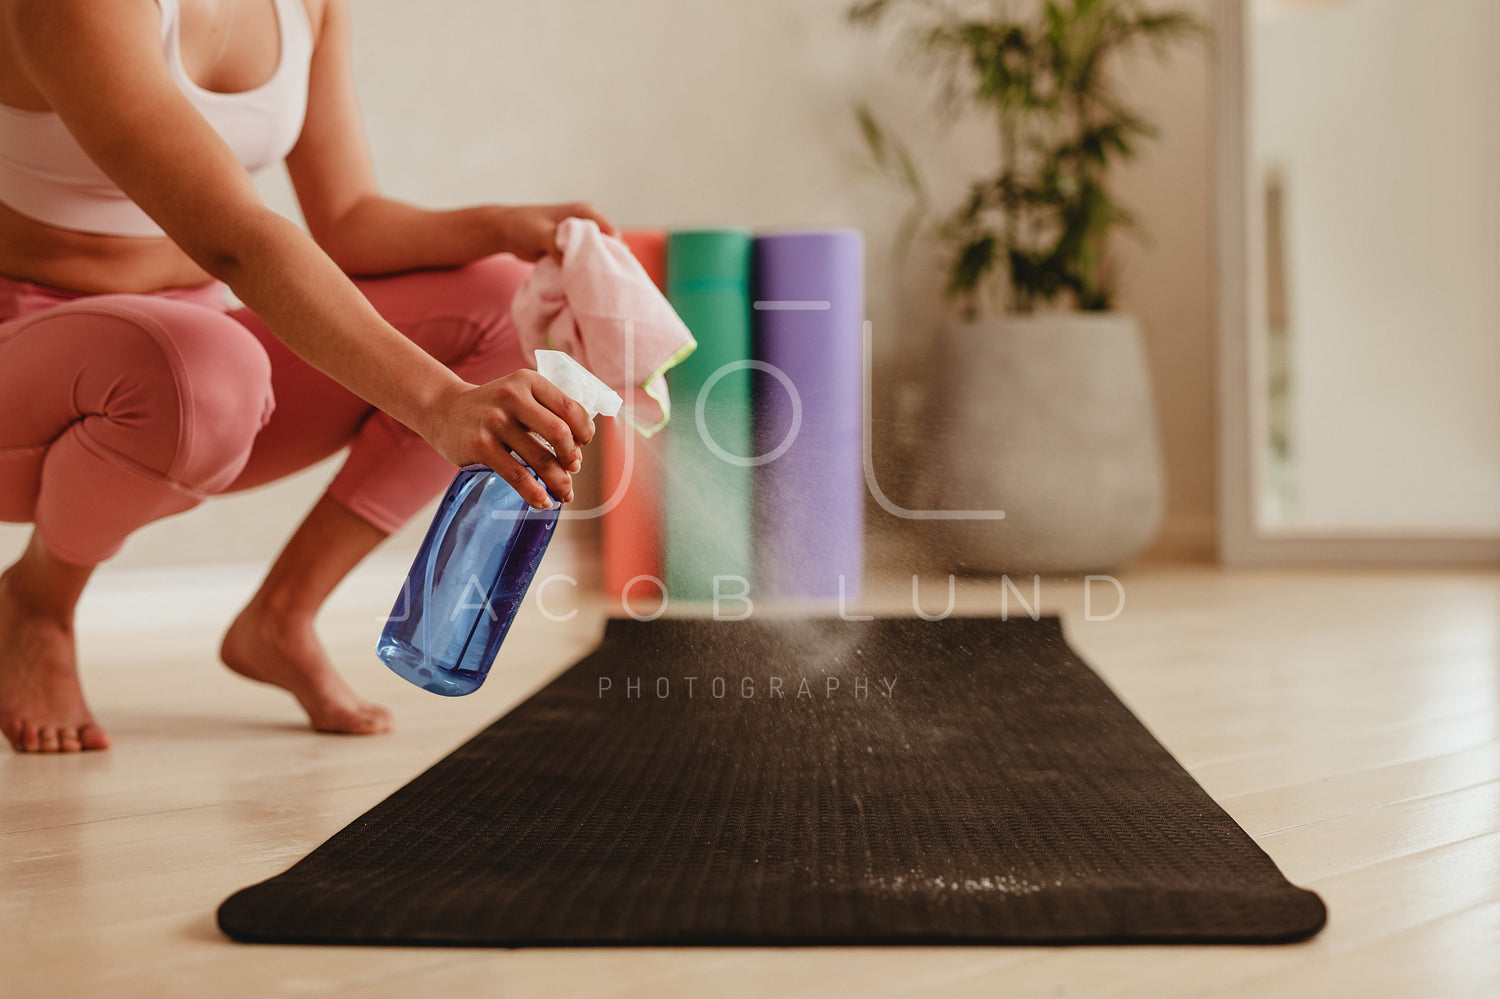 Workout & Yoga Accessories, Towels & Drink Bottles